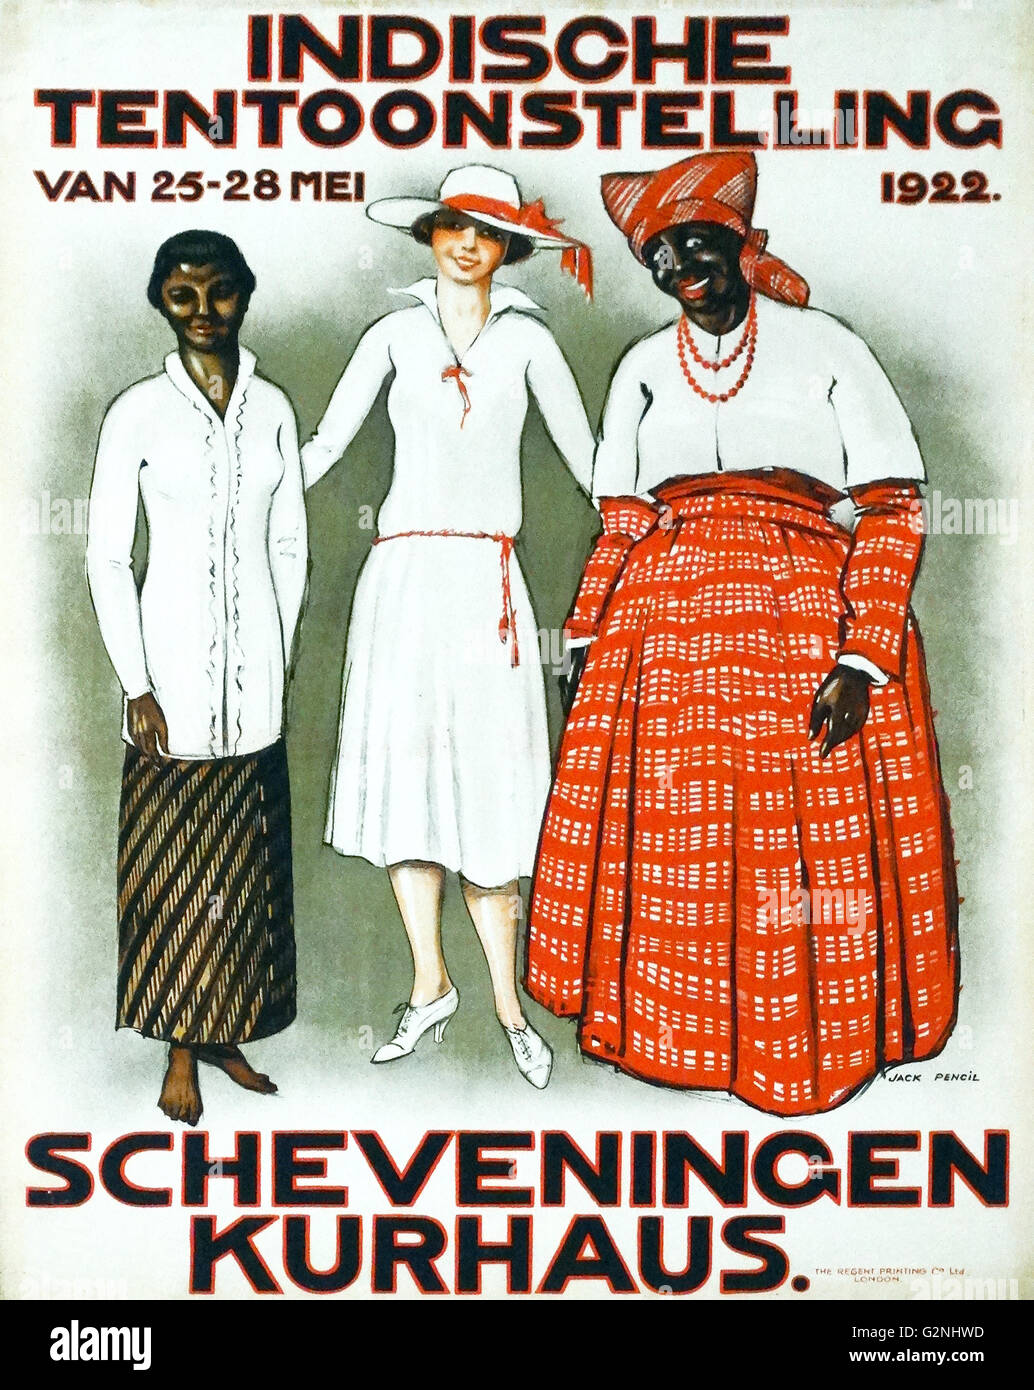 Poster for the Indian Exhibition 25-28 May, 1922, Scheveningen Kurhaus; Holland. Shows a Javanese a Dutch and a Suriname woman together Stock Photo